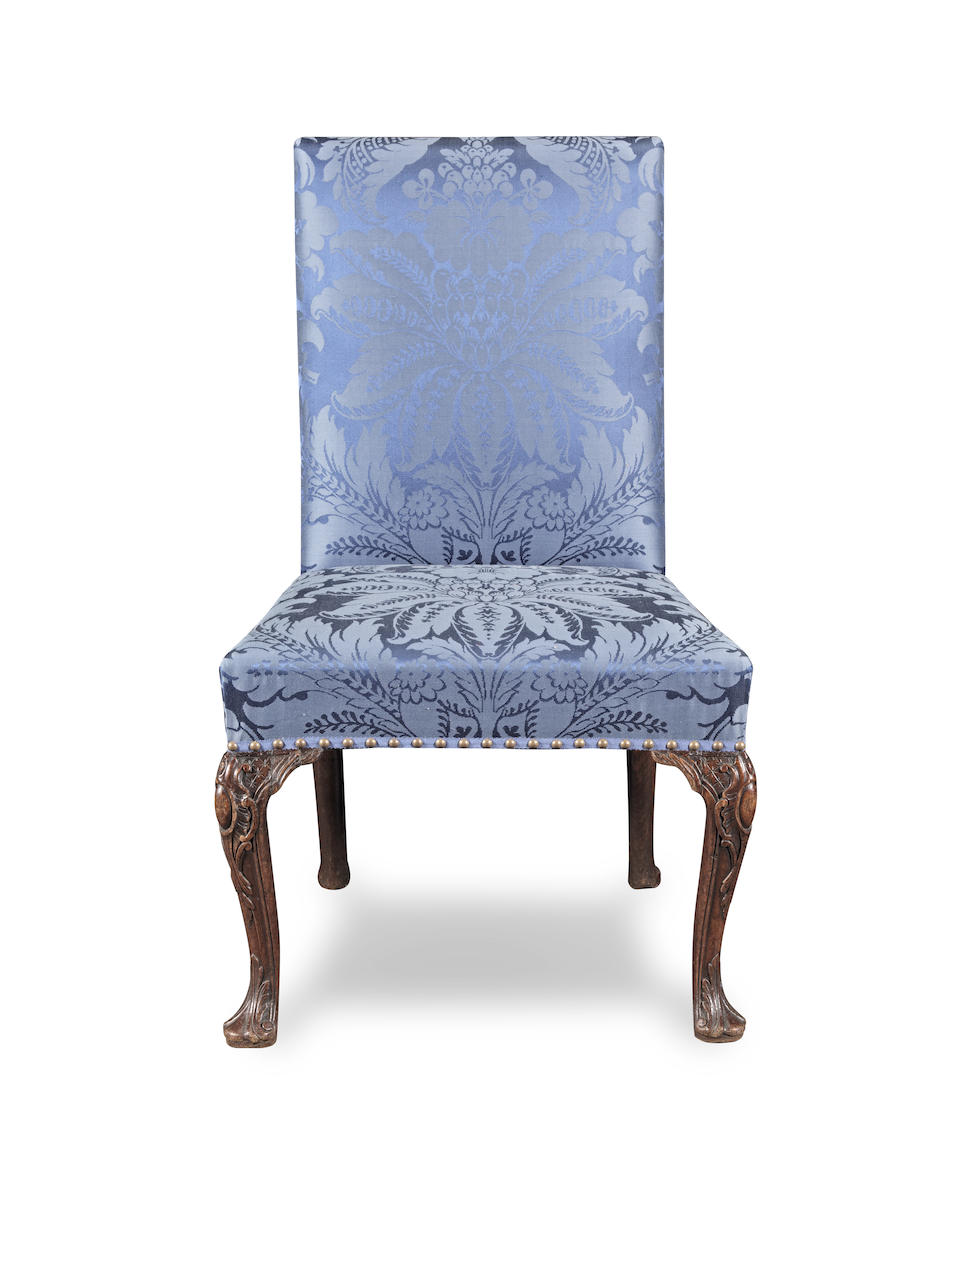 A George III mahogany side chair in the manner of Paul Saunders